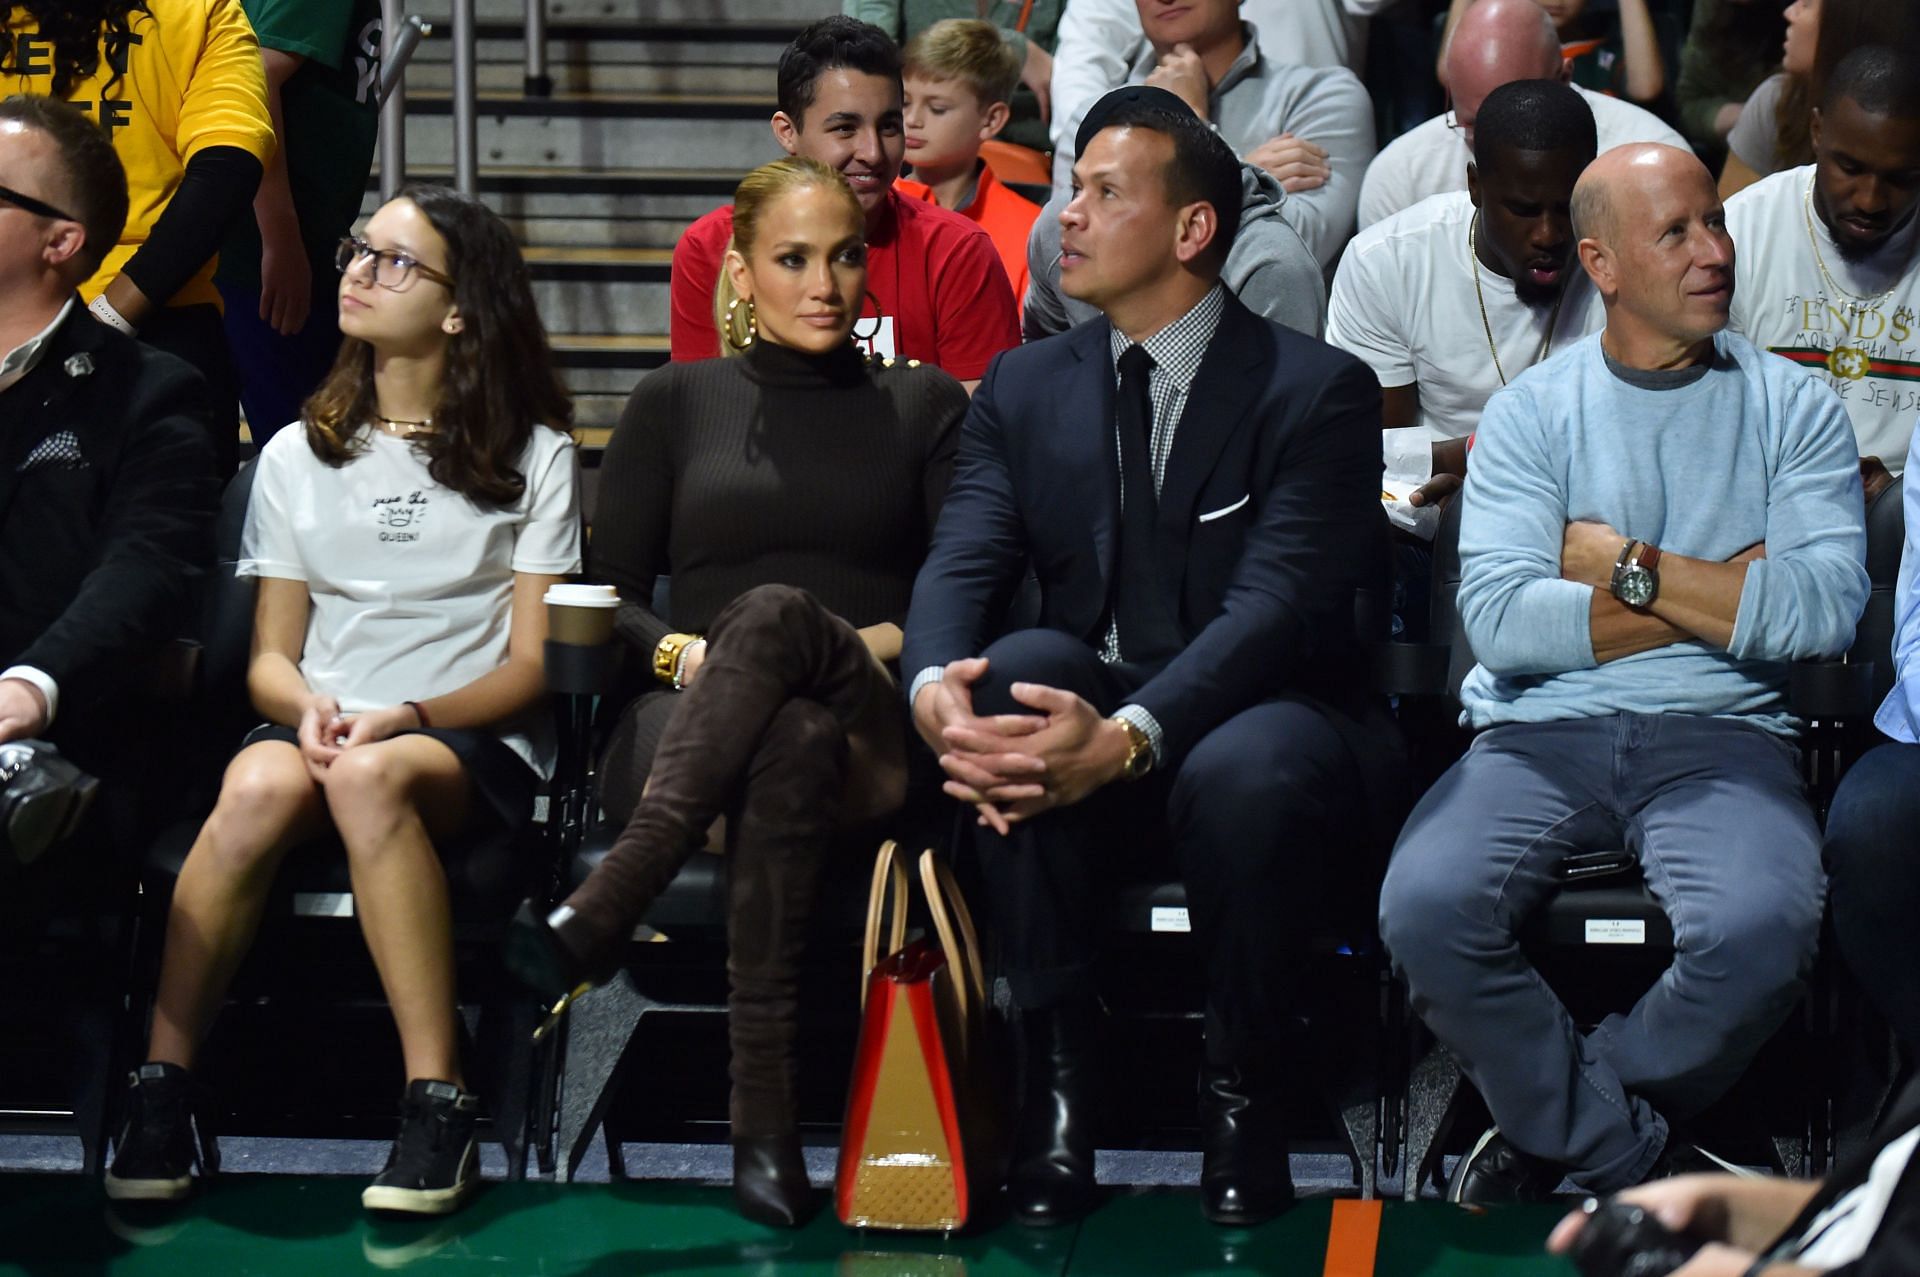 Duke v Miami: MIAMI, FL - JANUARY 15: Former New York Yankees third baseman Alex Rodriguez and recording artist Jennifer Lopez attend the basketball game between the Duke Blue Devils and the Miami Hurricanes at The Watsco Center on January 15, 2018, in Miami, Florida. (Photo by Eric Espada/Getty Images)